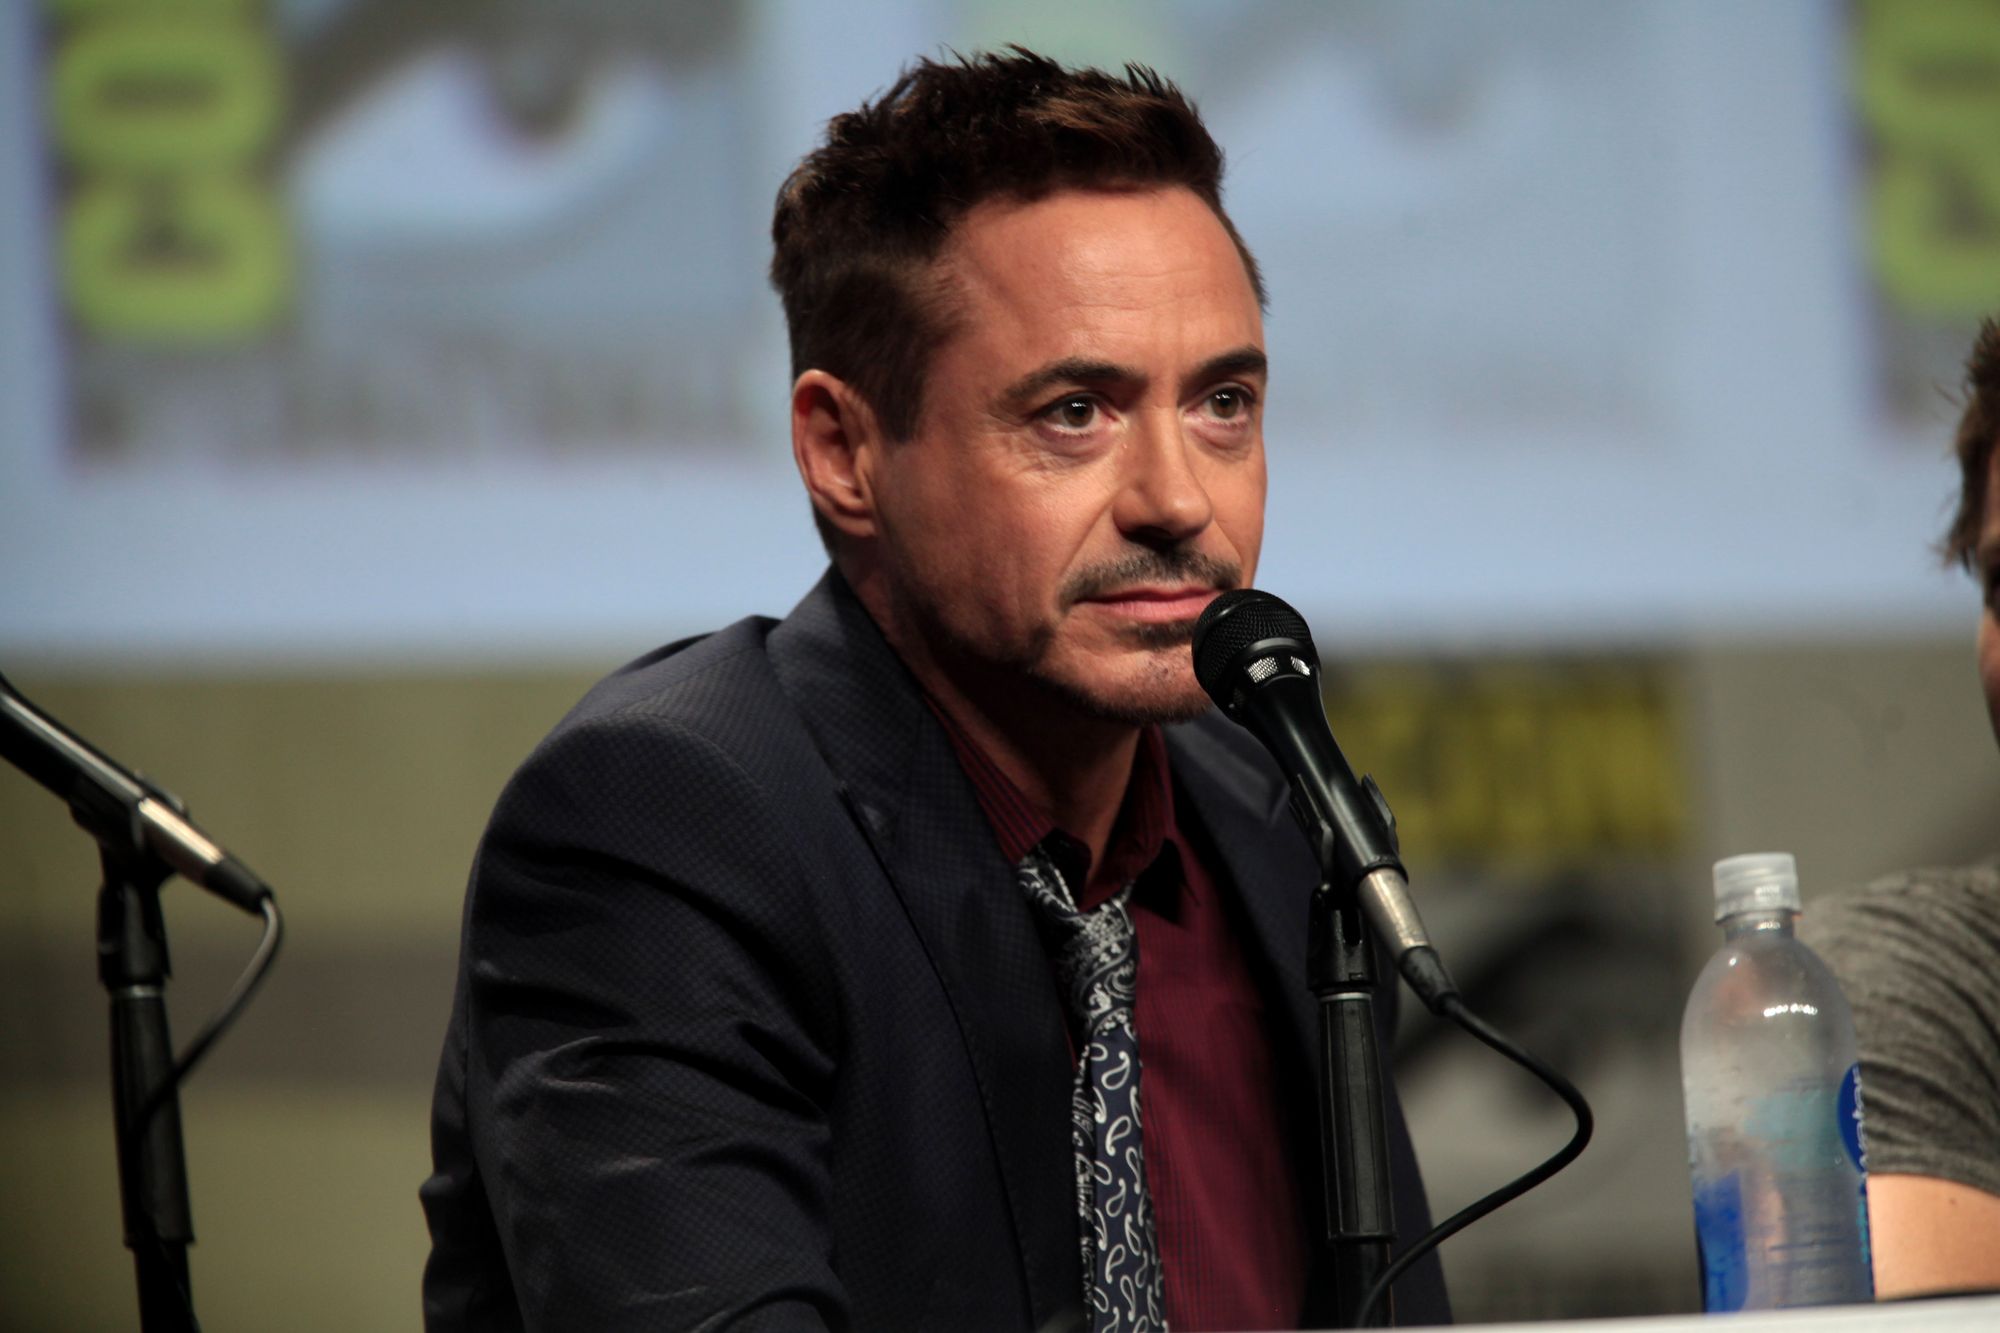 Robert Downey, Jr. speaking at the 2014 San Diego Comic Con